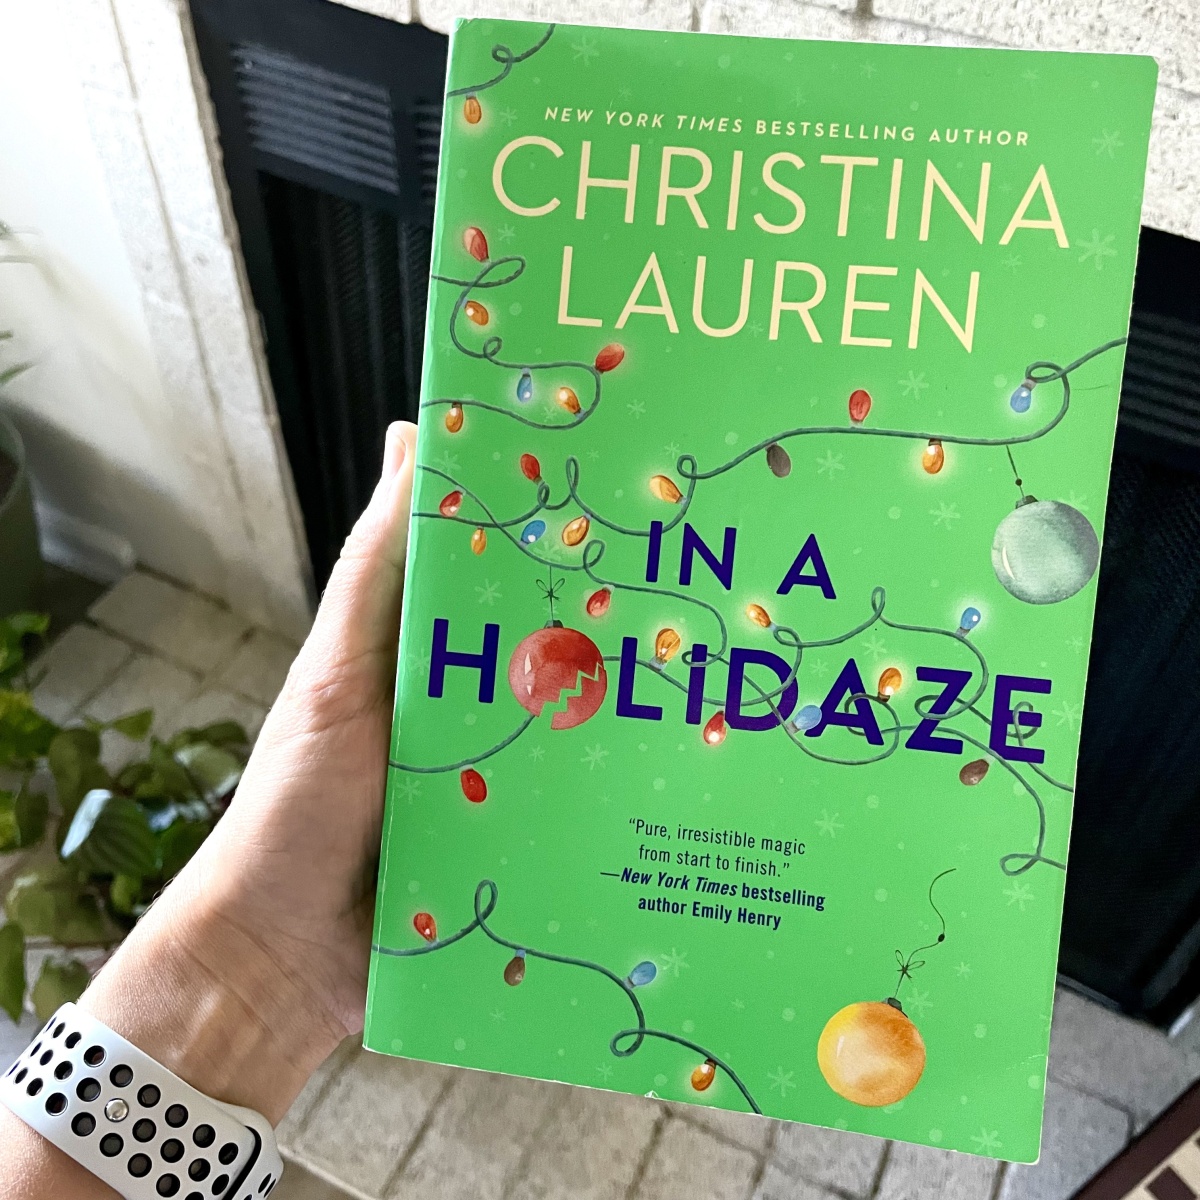 Just Read: “In a Holidaze” by Christina Lauren